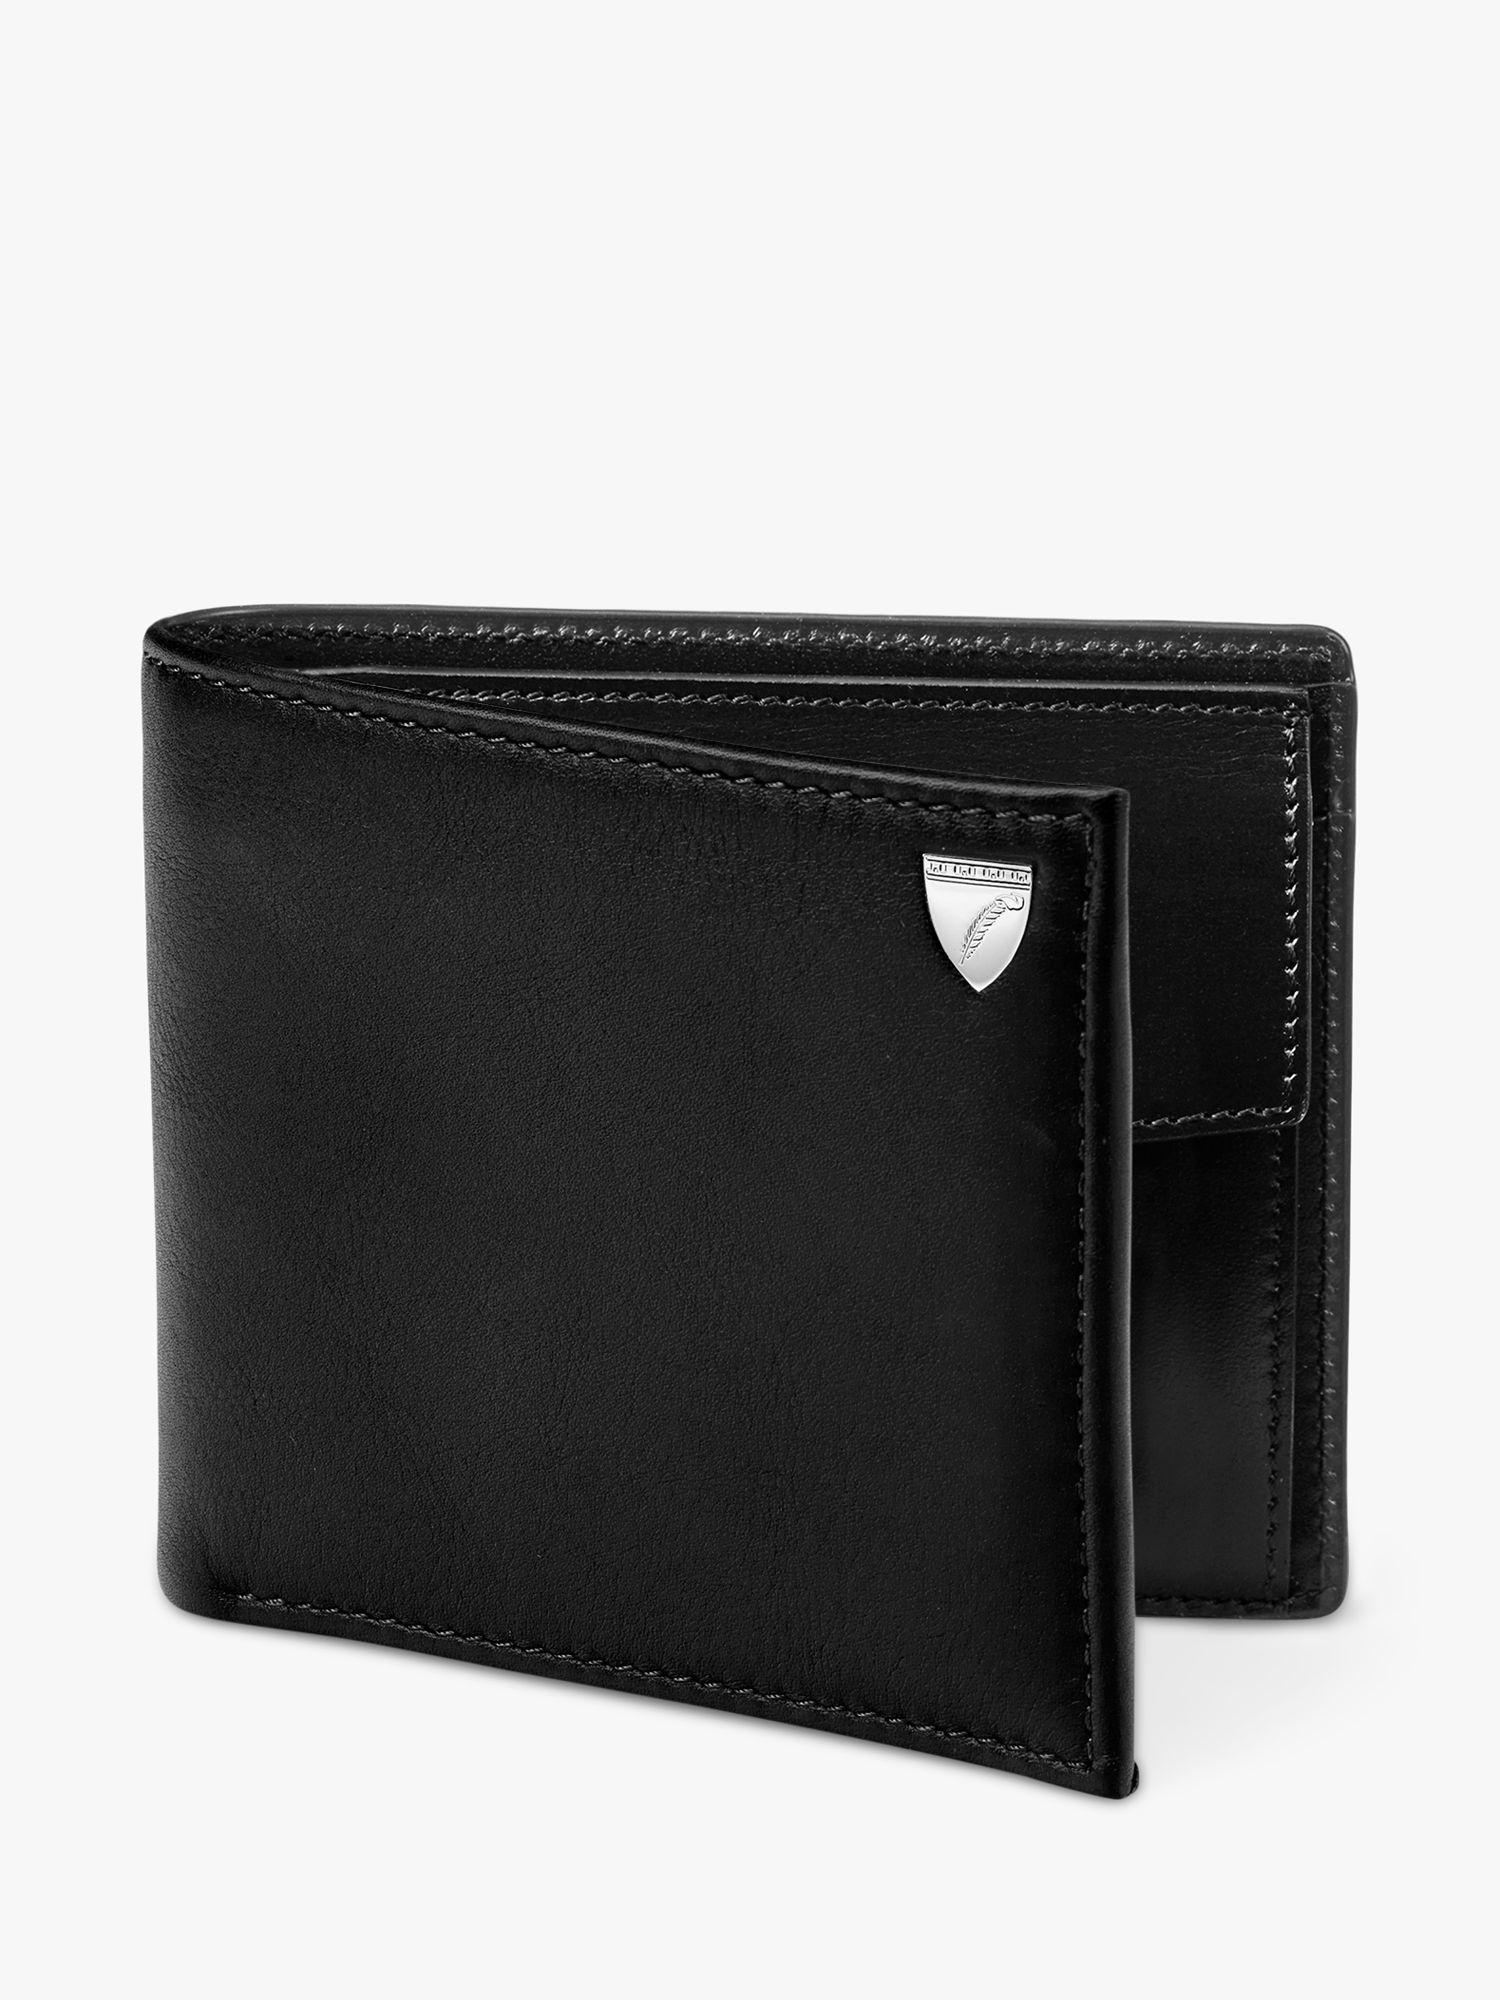 Aspinal of London Single Billfold Smooth Leather Coin Wallet, Black